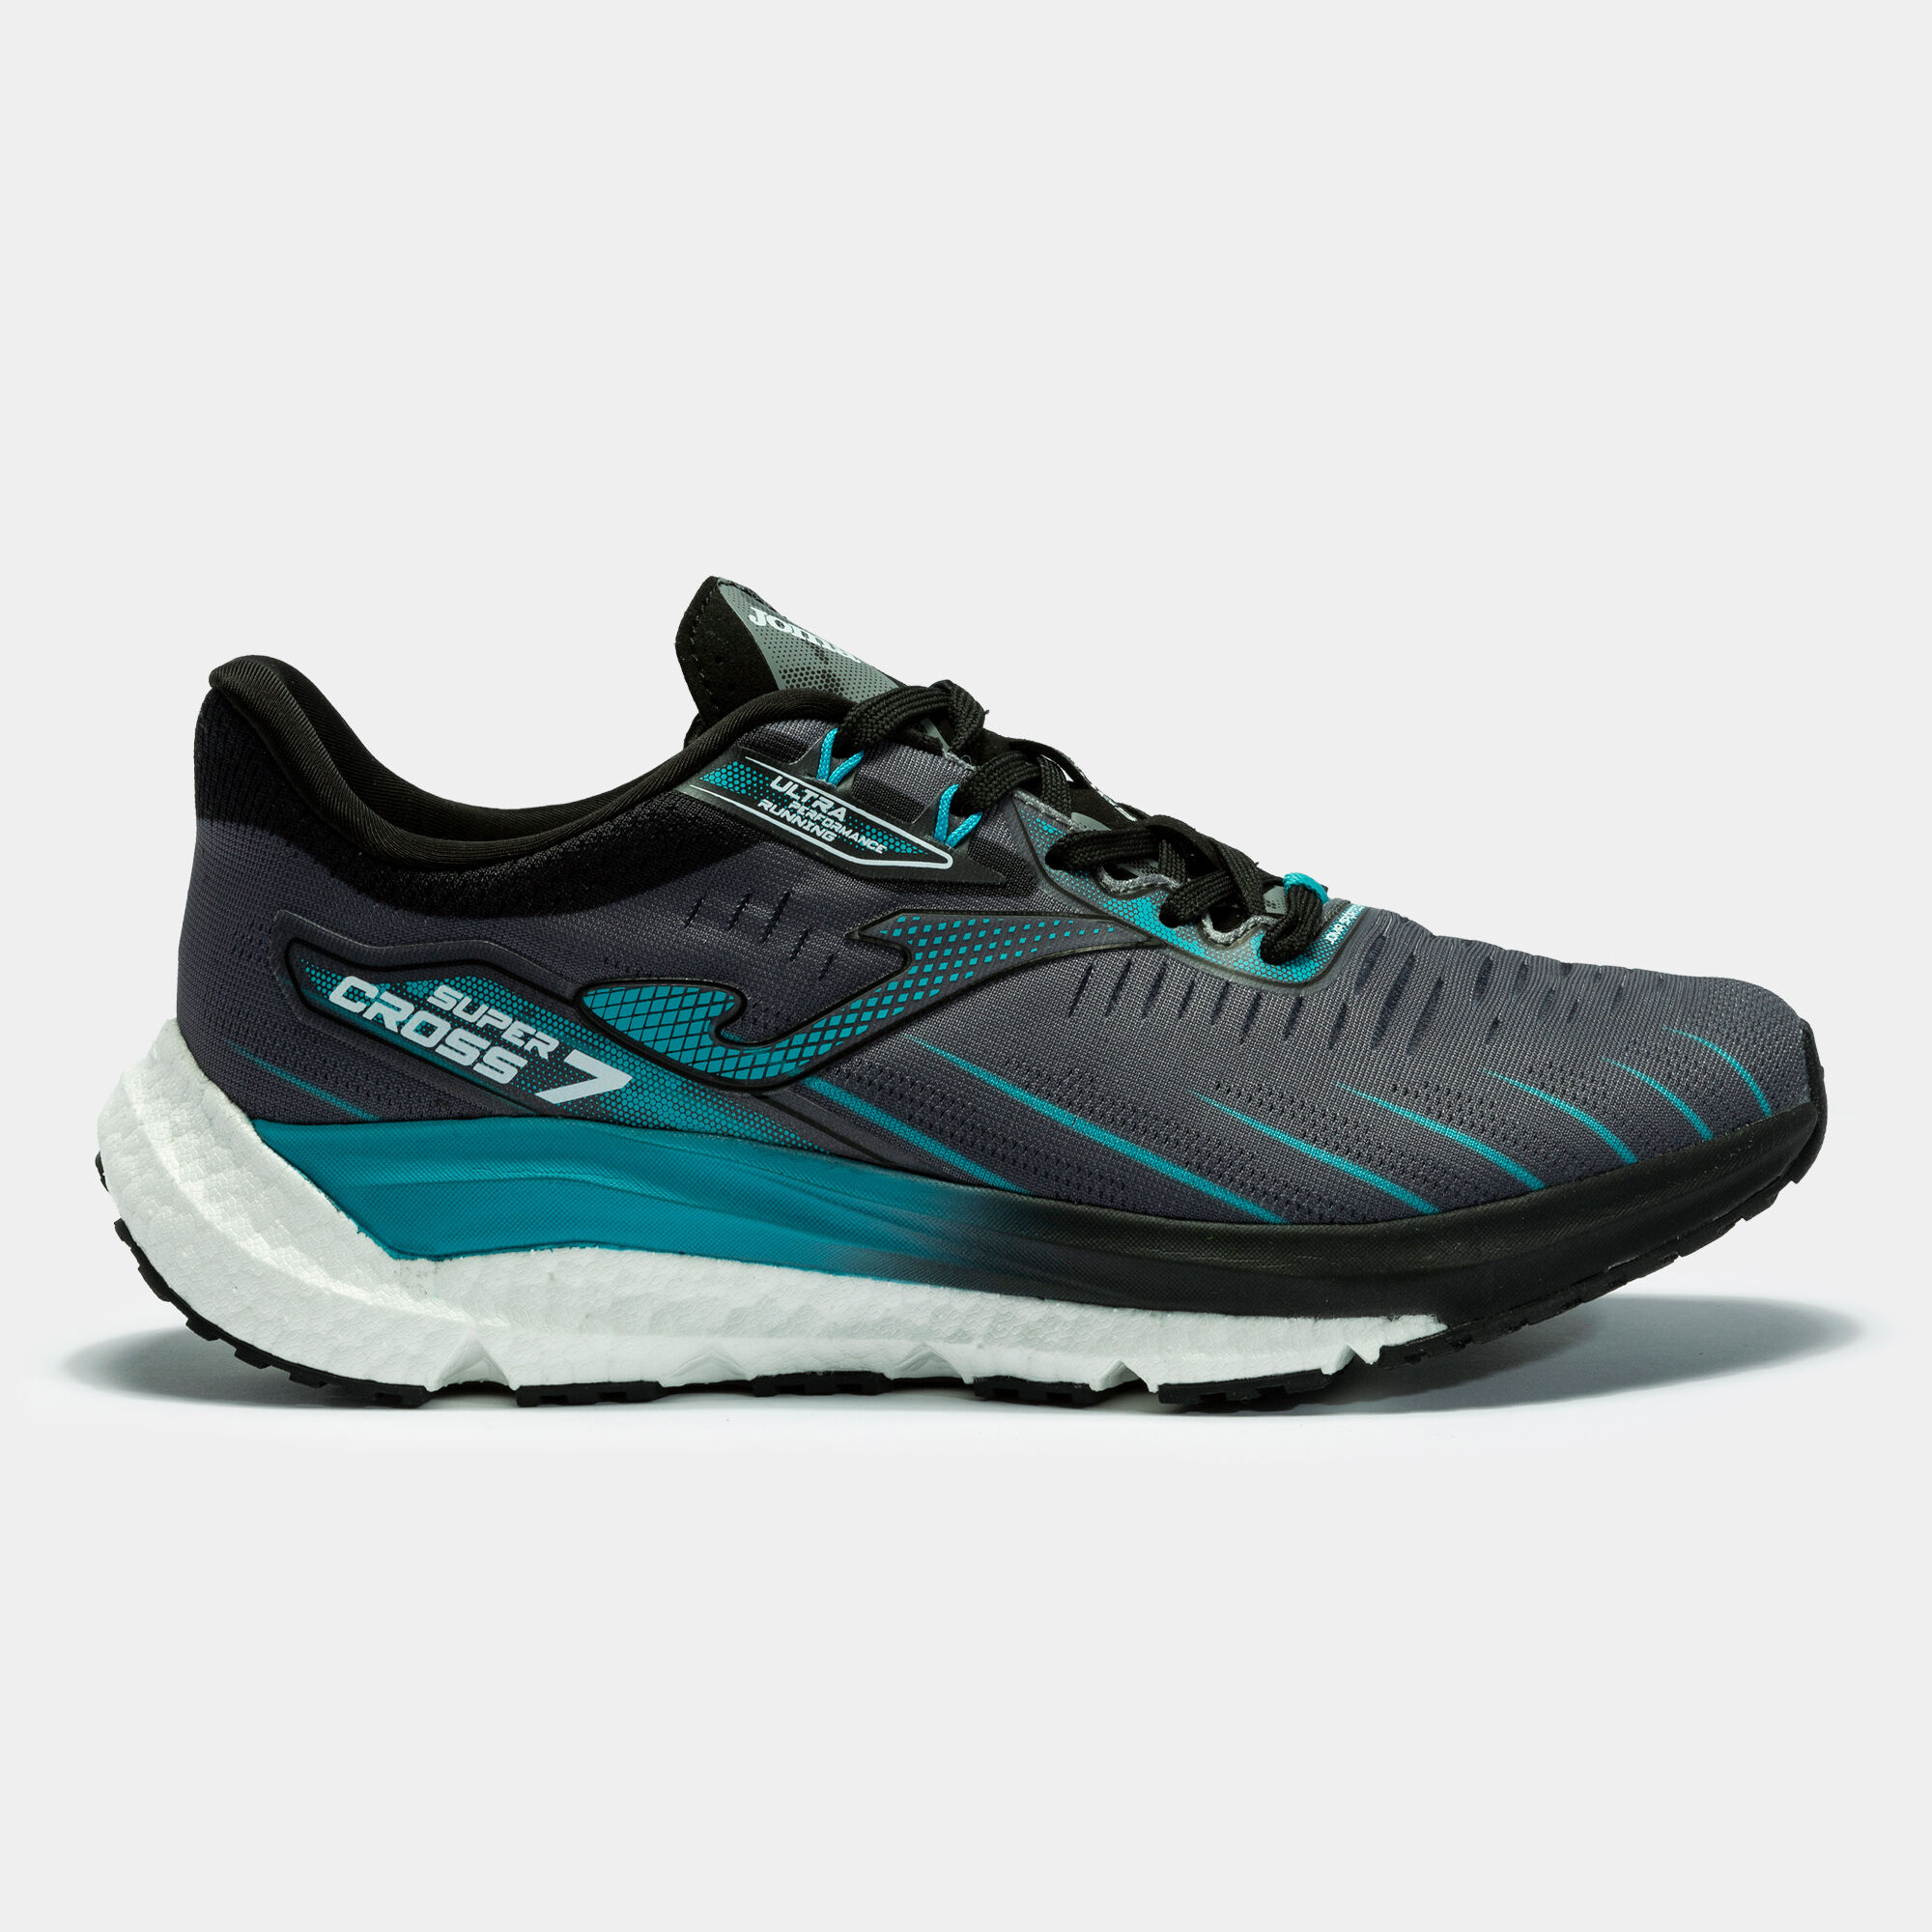 RUNNING SHOES SUPER CROSS 22 MAN GRAY TURQUOISE